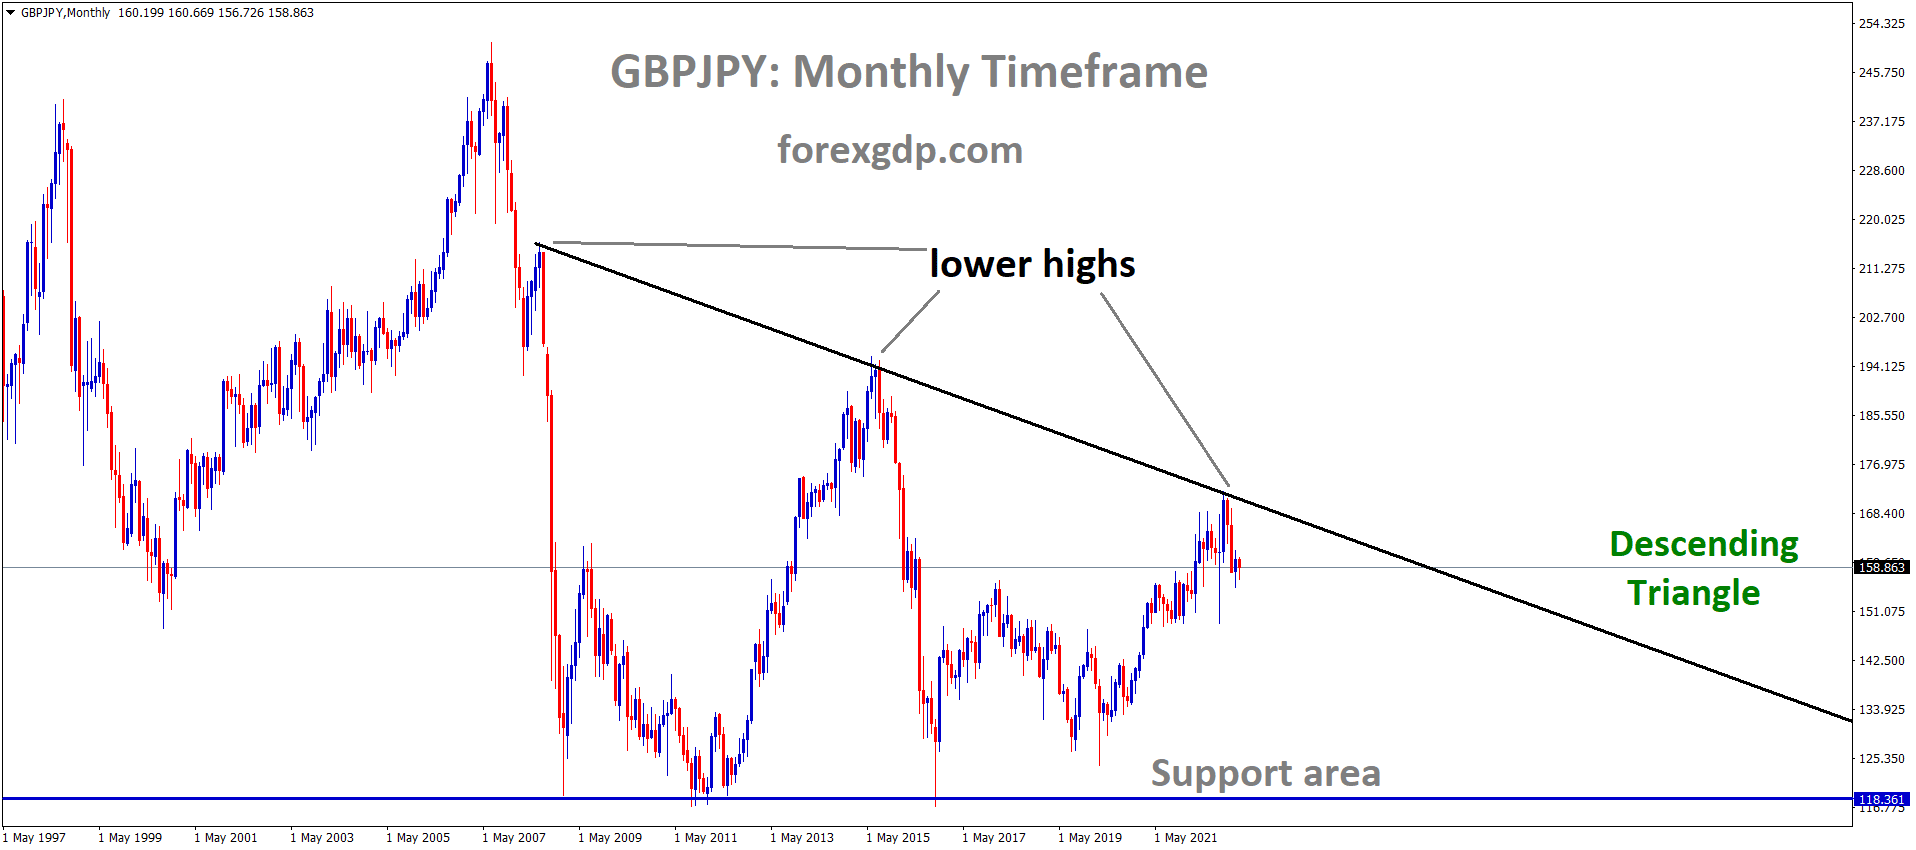 GBPJPY Monthly TF analysis Market is moving in the Descending triangle pattern and the market has fallen from the lower high area of the pattern